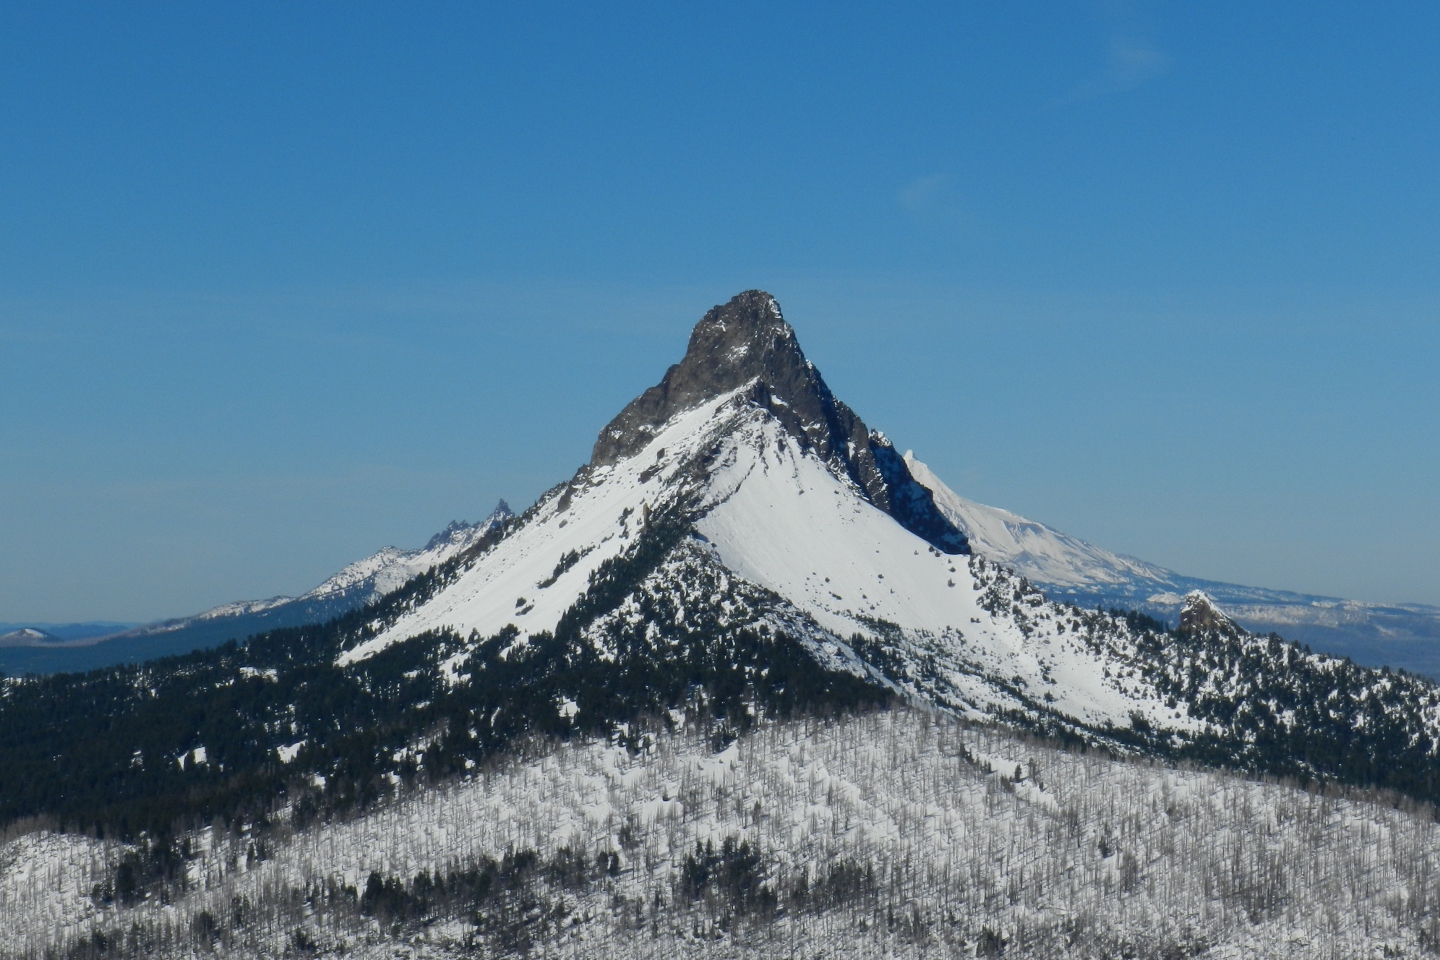 Mts. Washington, Three Fingered Jack and Jefferson from top of Belknap Crater